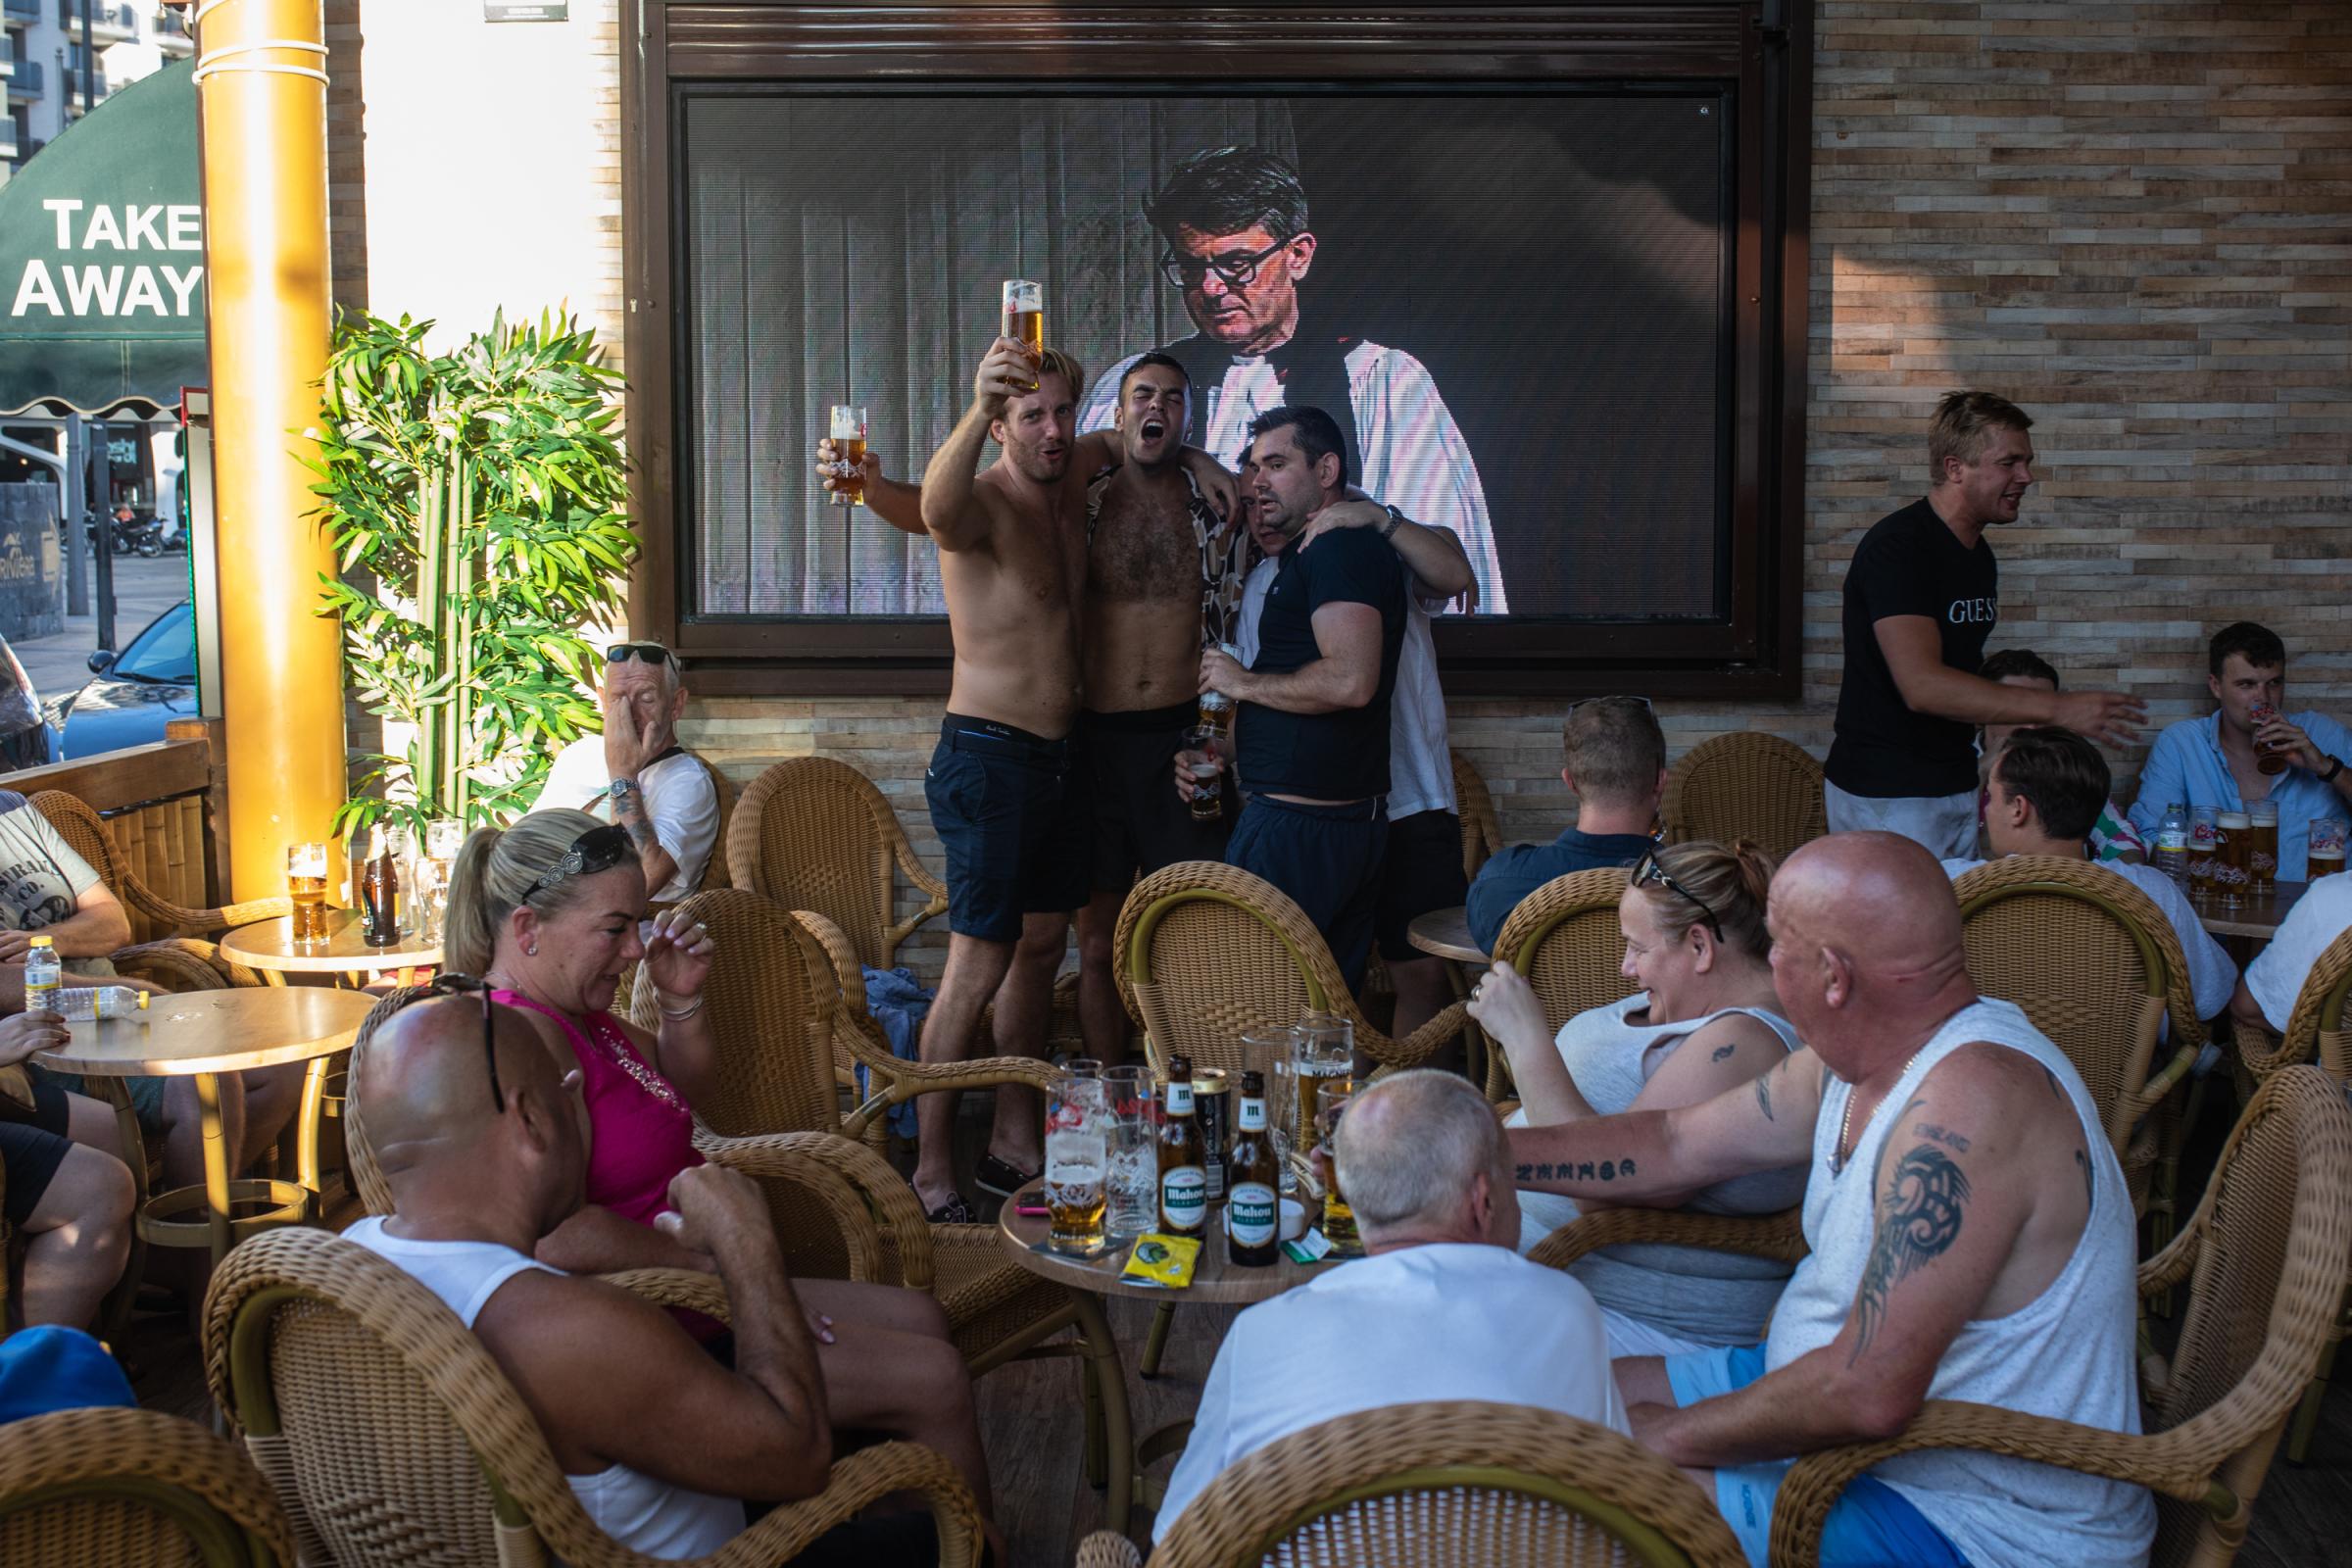 British Tourists In Benidorm Pay Tribute To Queen Elizabeth II - BENIDORM, SPAIN - SEPTEMBER 9: Young people toast with...